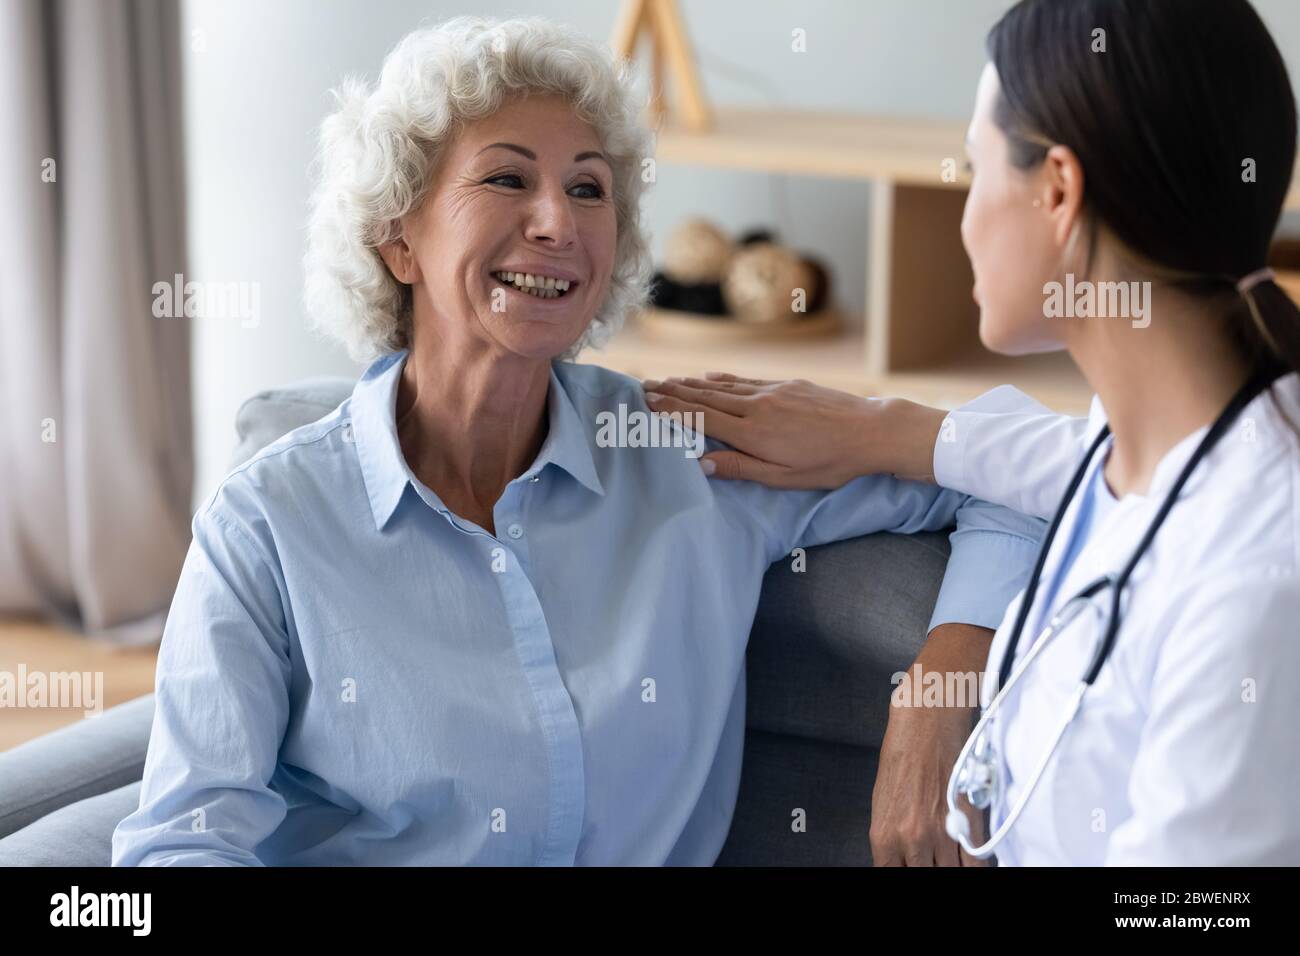 Elderly woman patient talking with young caregiver seated on couch Stock Photo